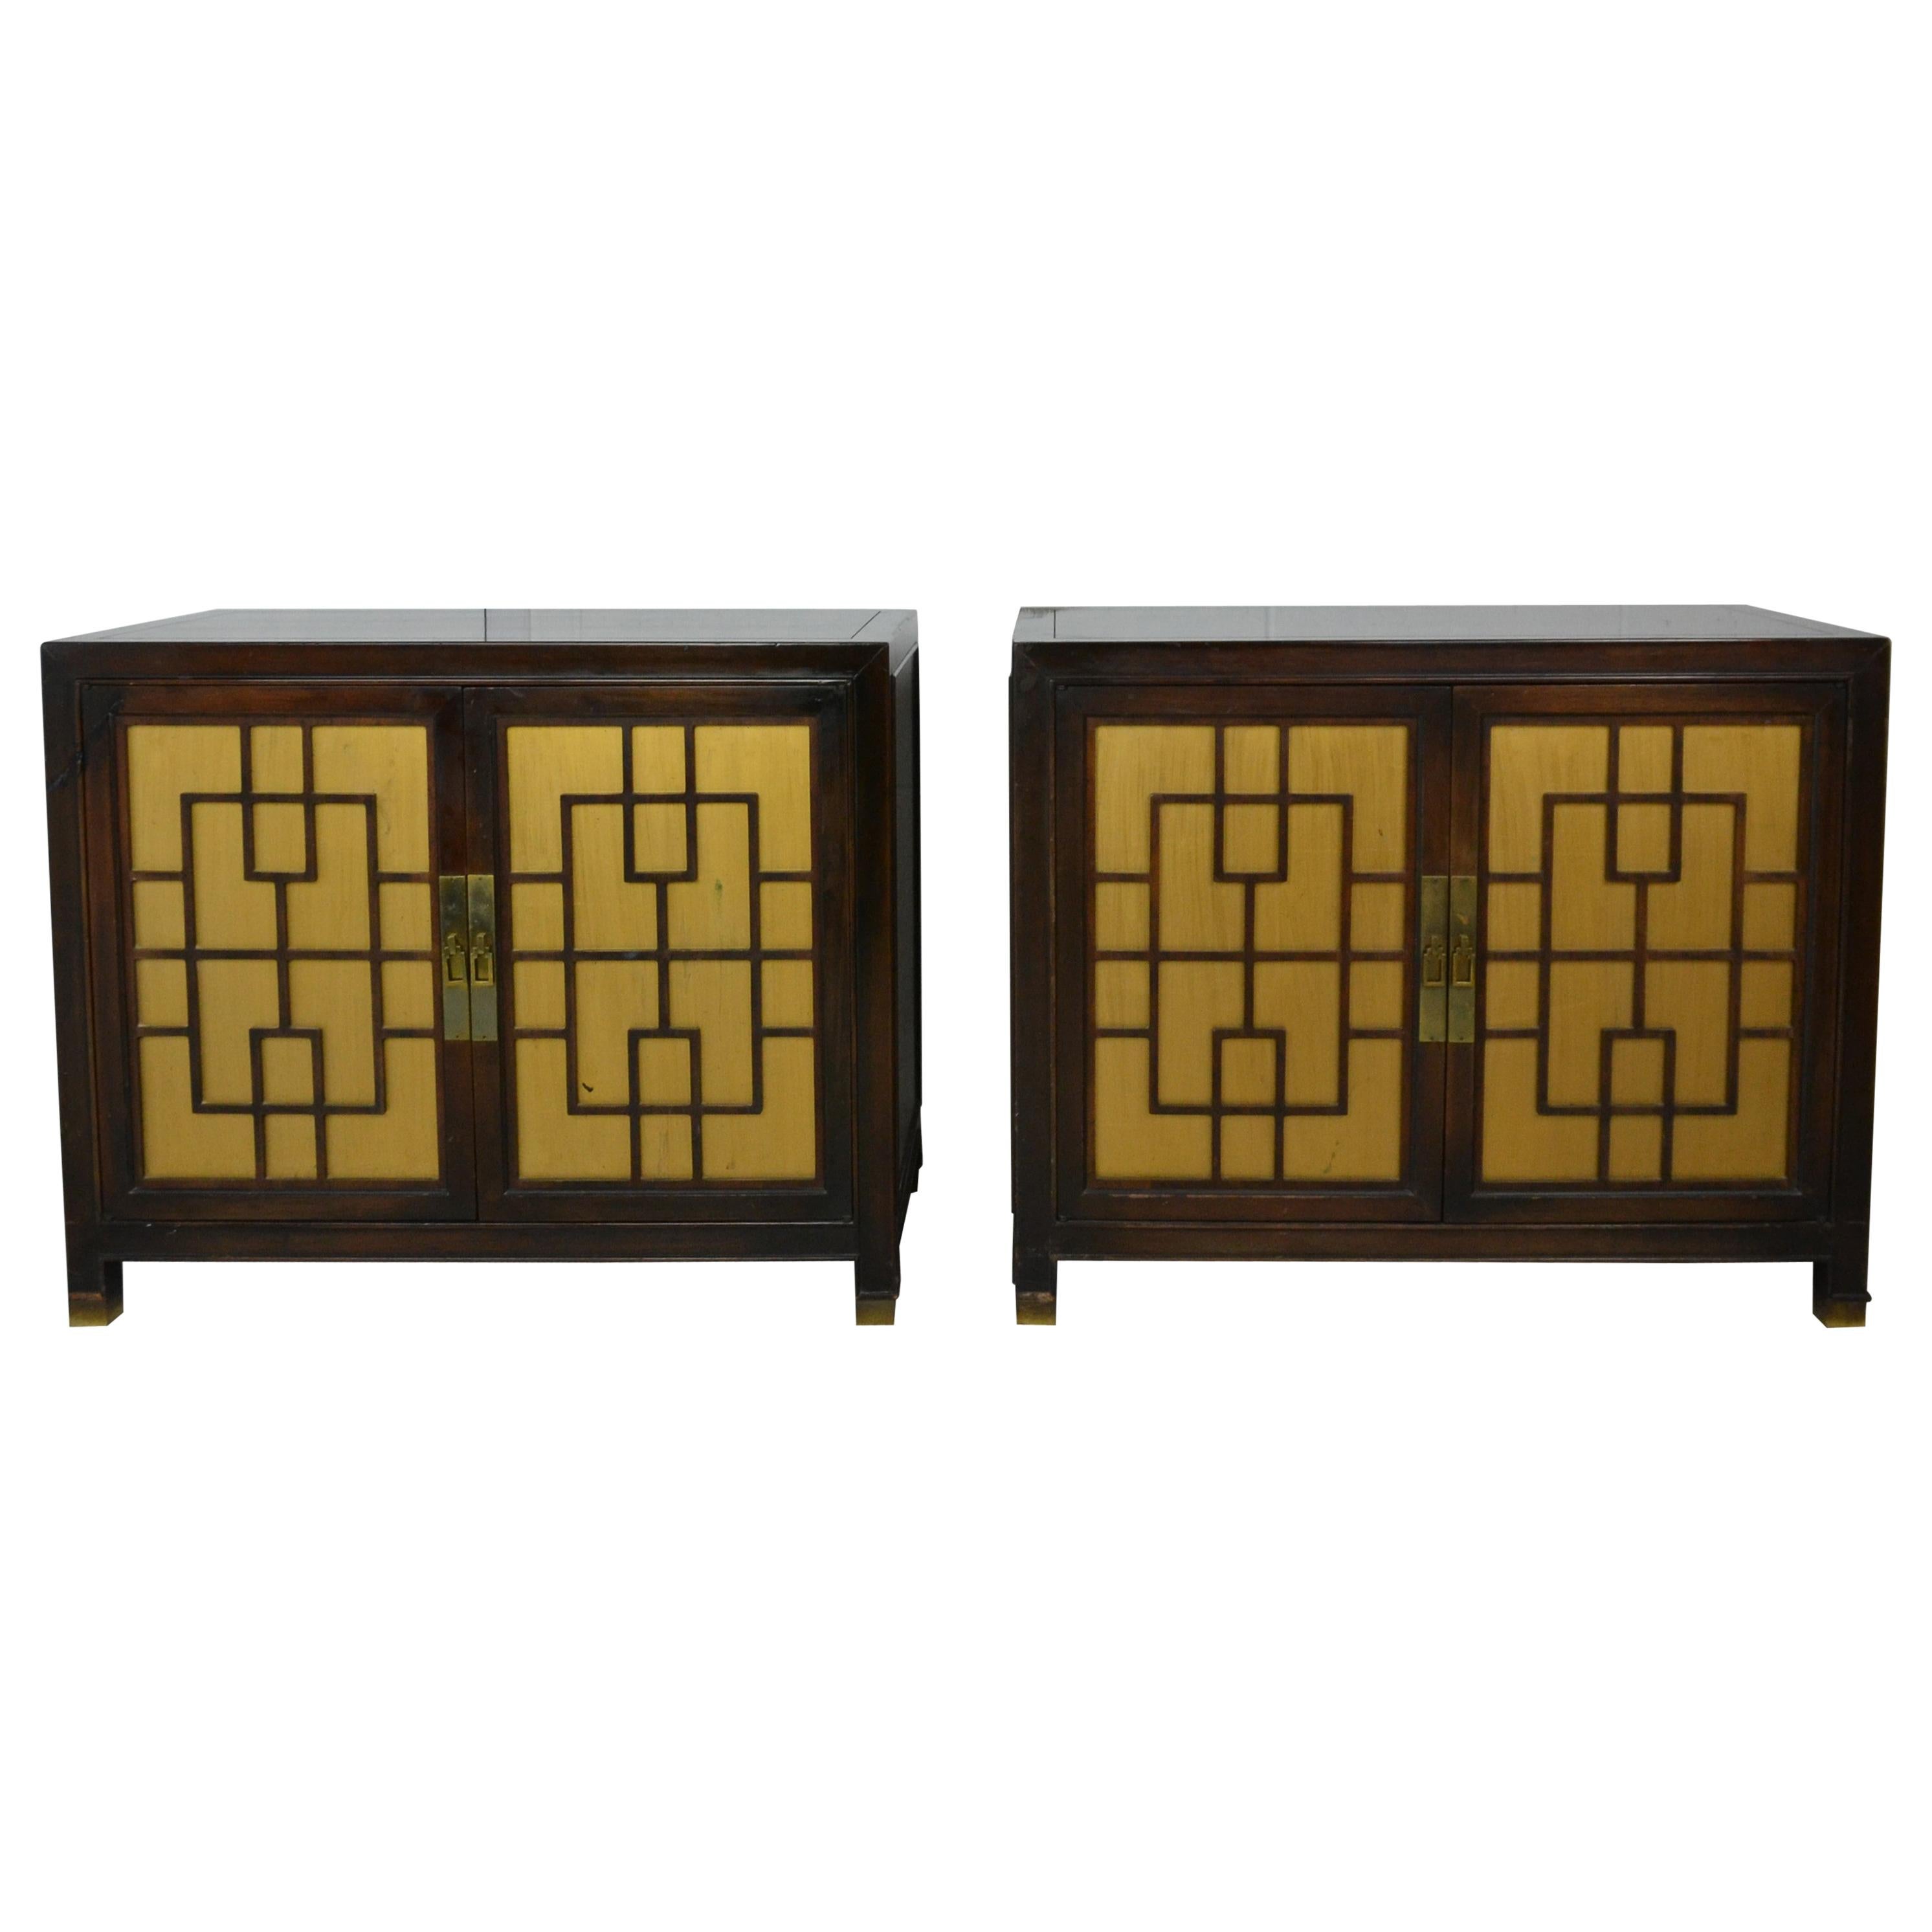 Pair of Asian Style End Tables or Nightstands